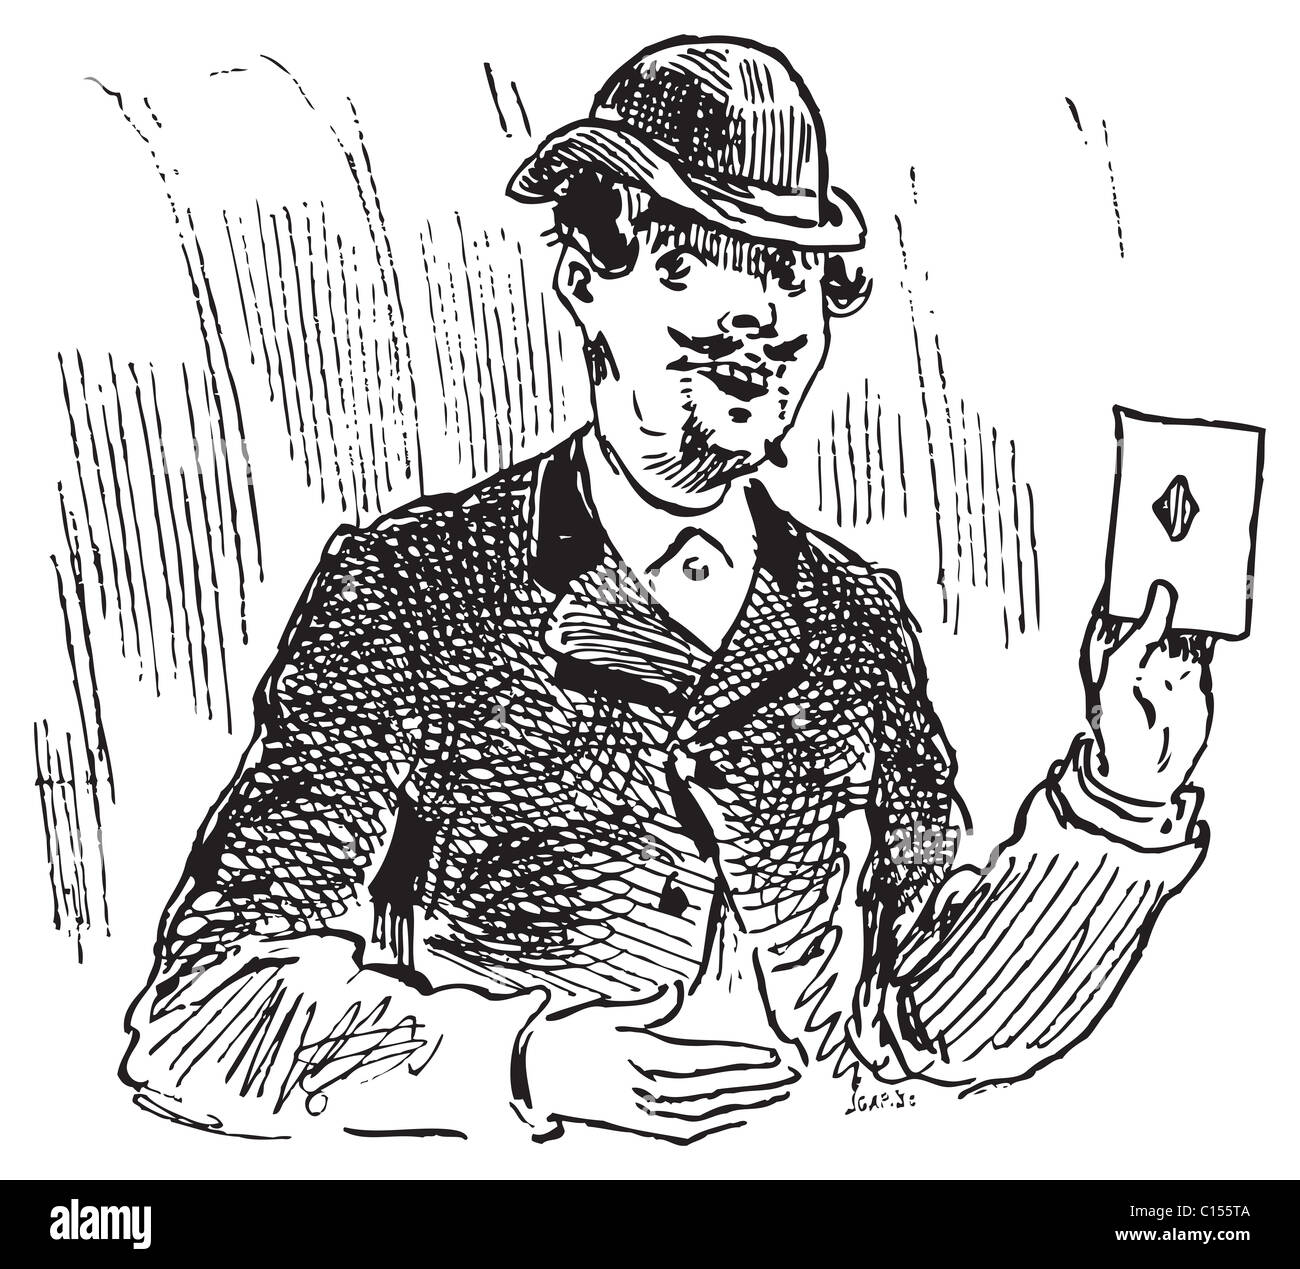 The three card trickster engraving illustration Stock Photo